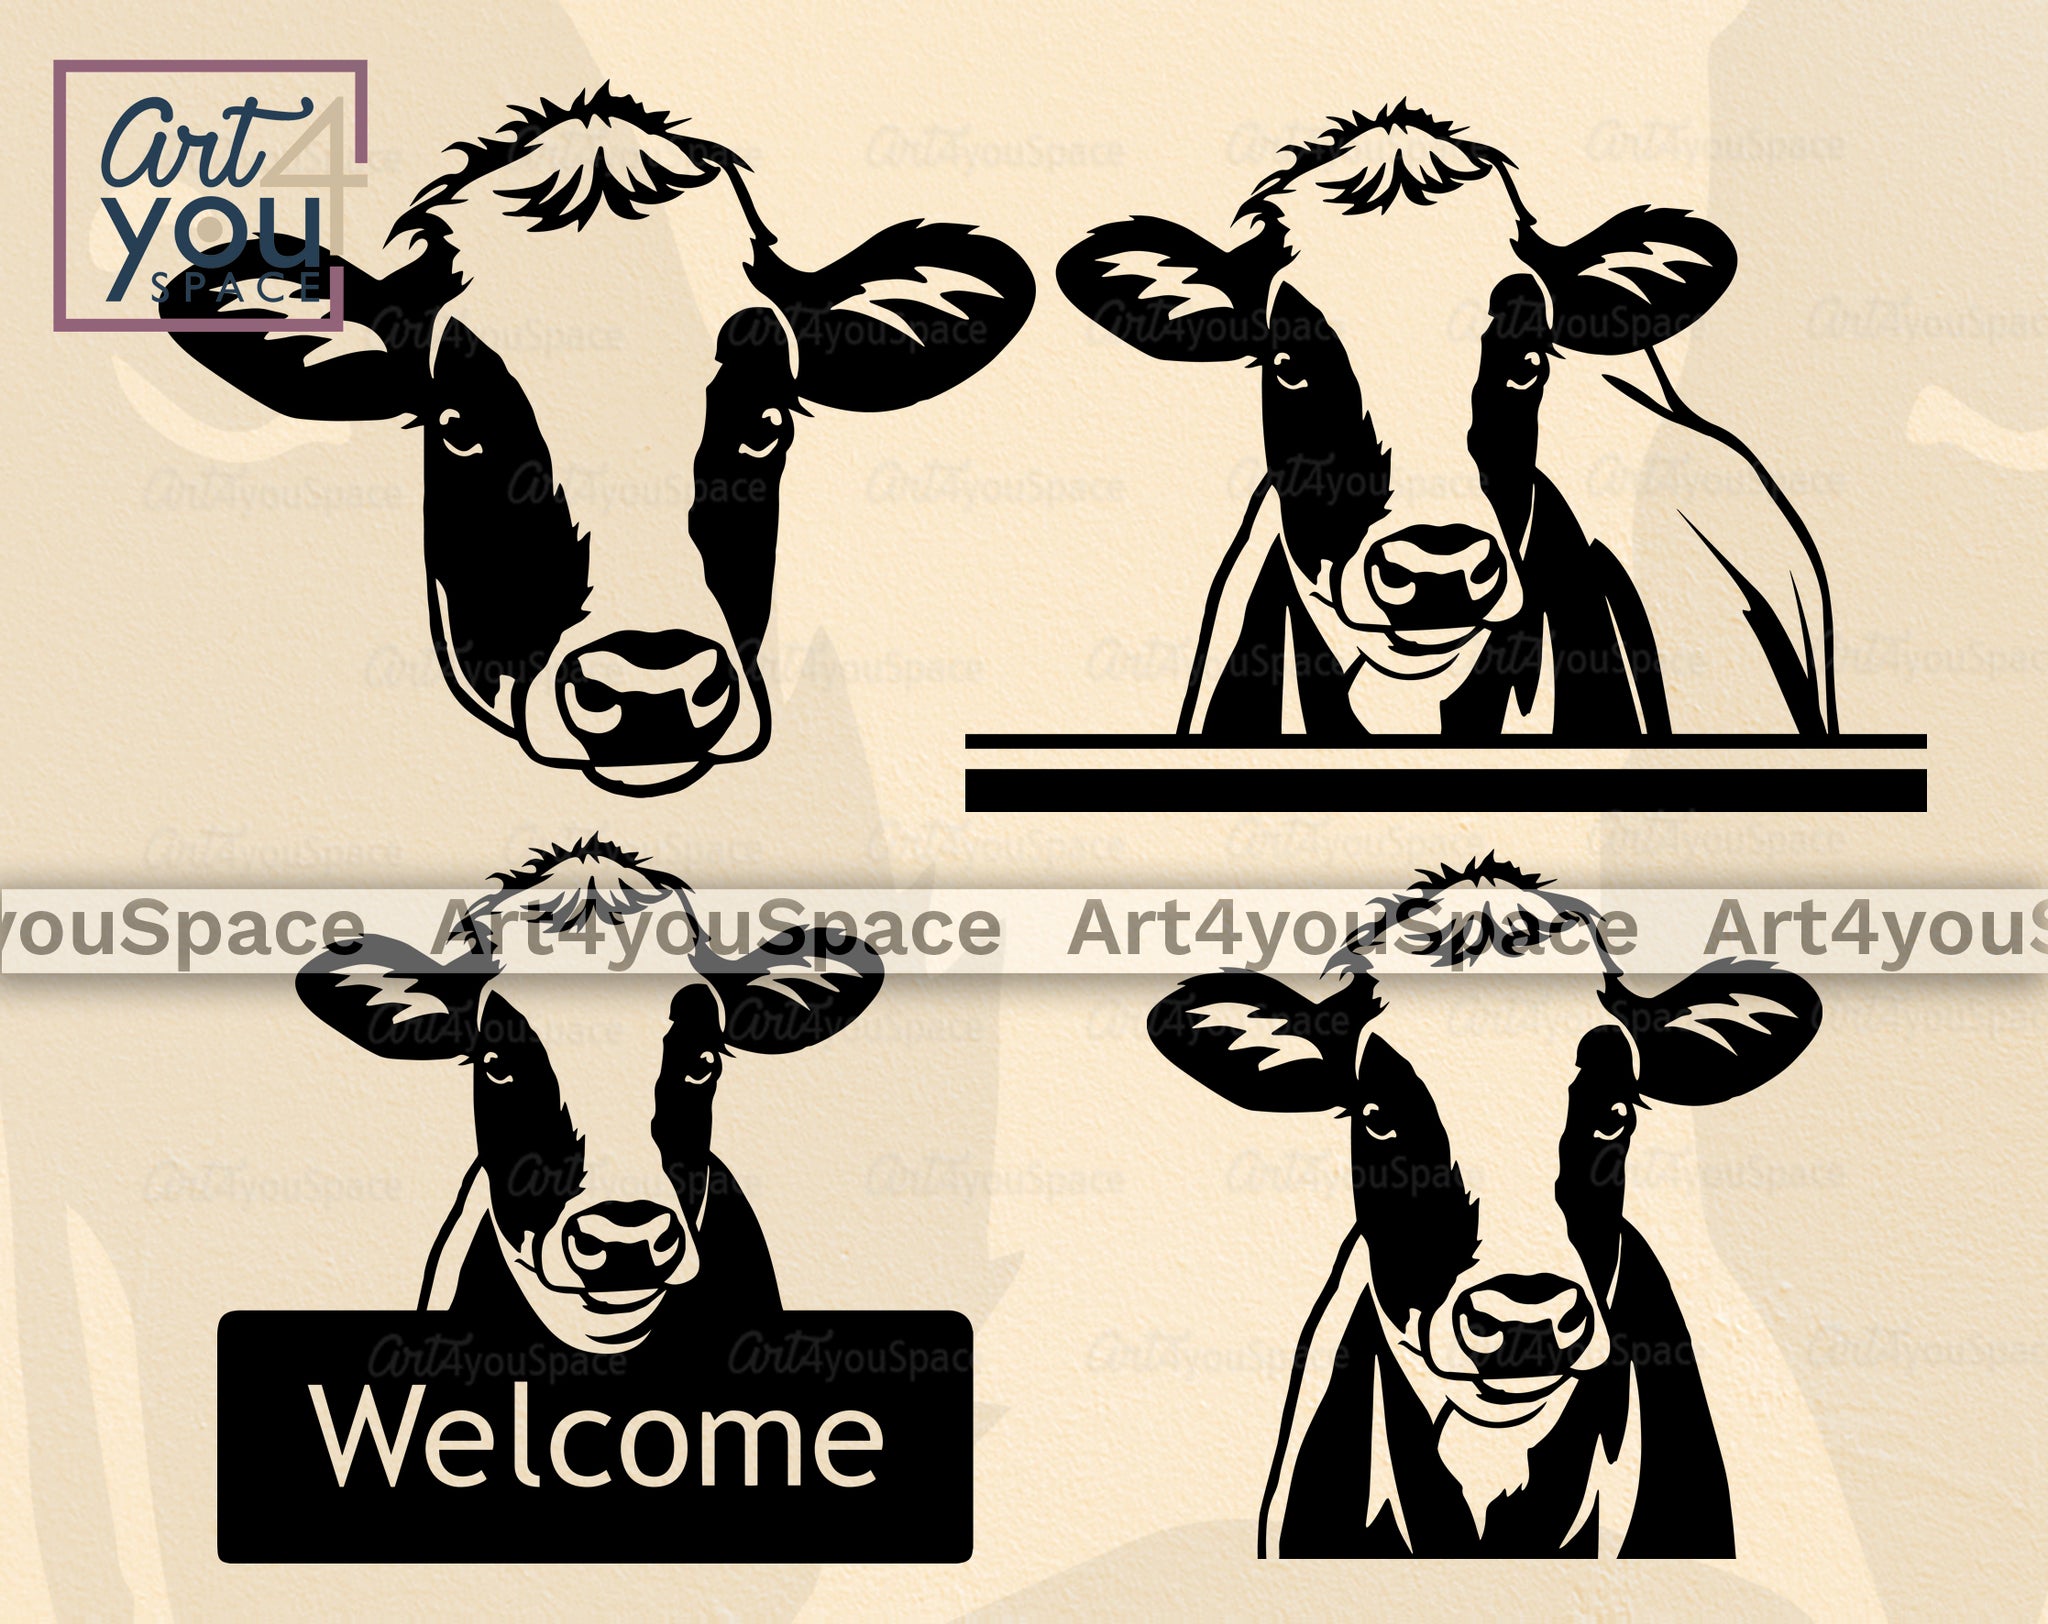 cattle head clipart